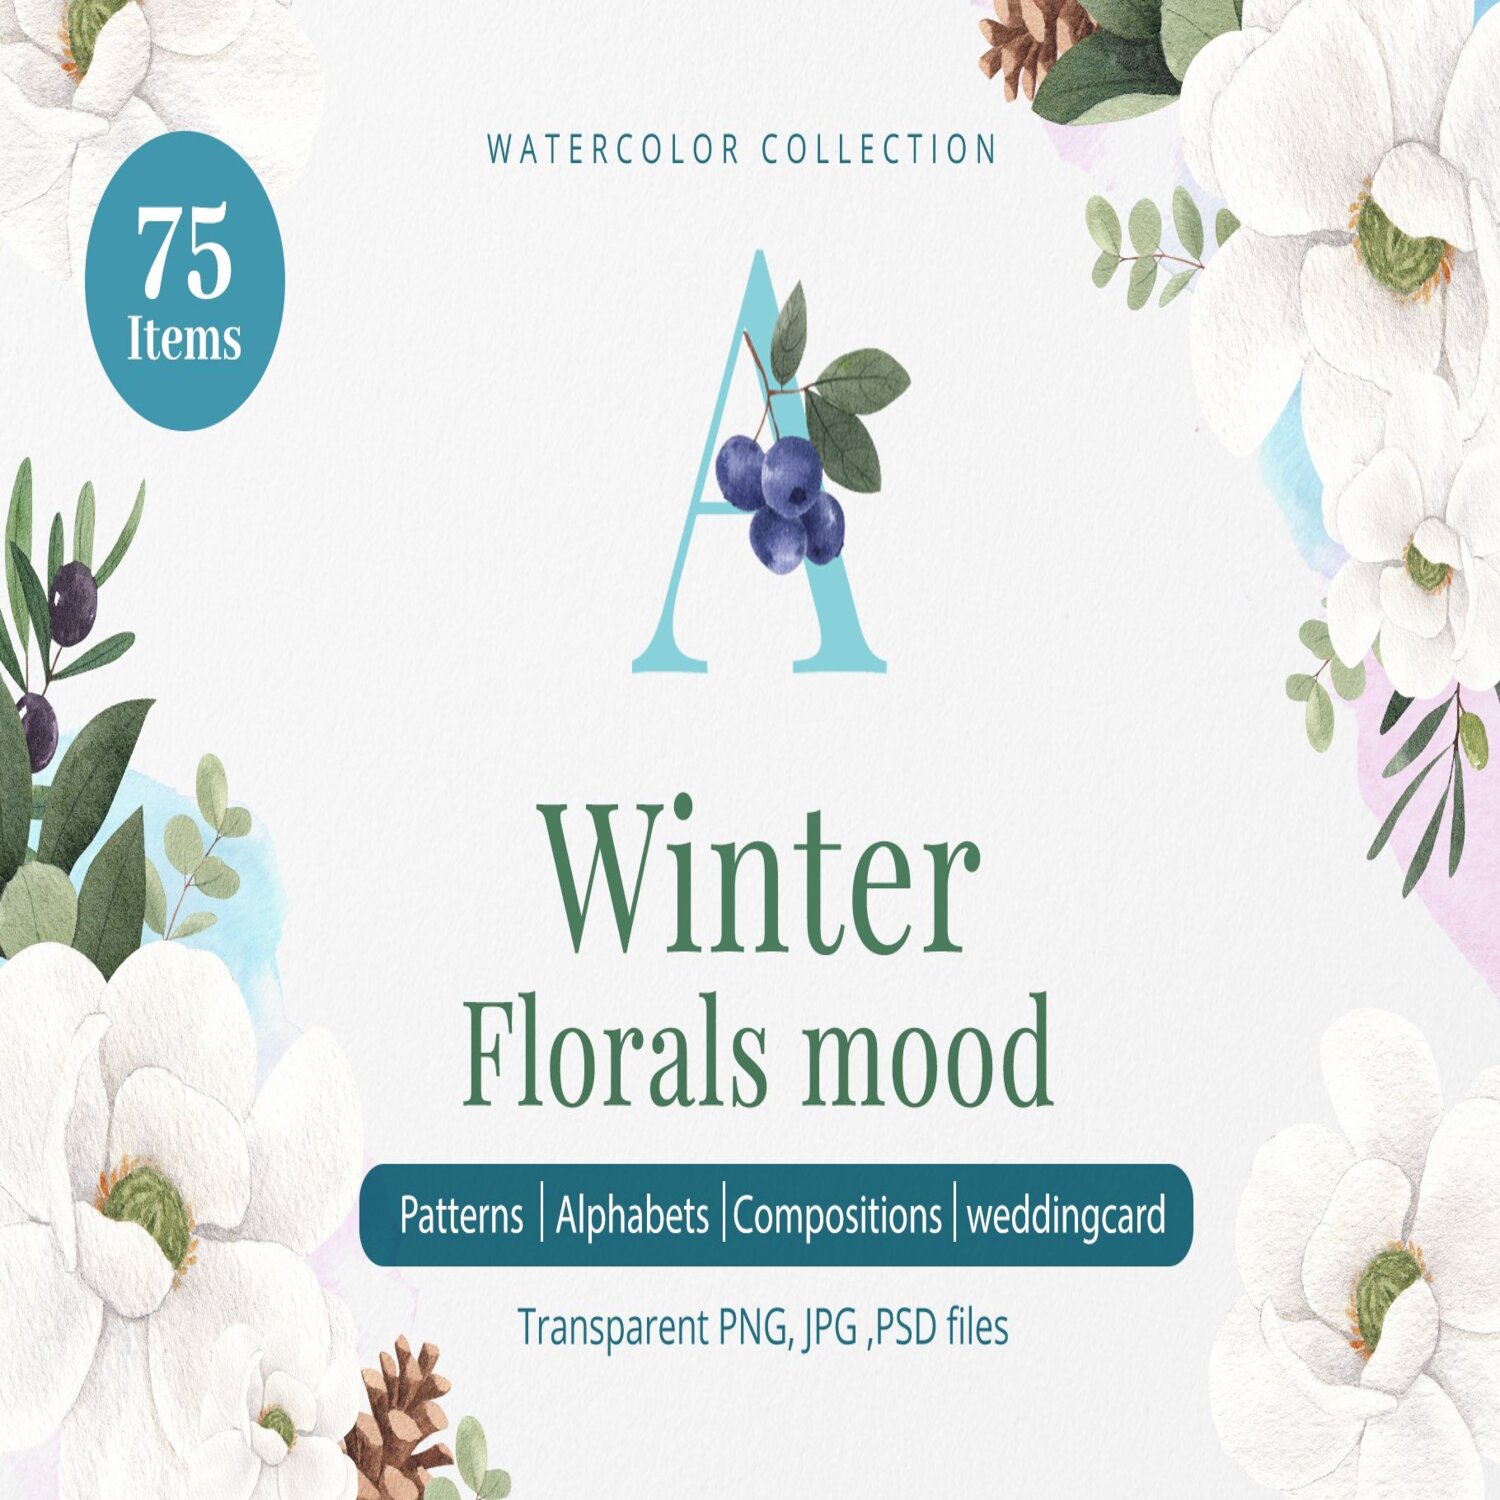 Winter Flowers That Bloom Watercolor cover.